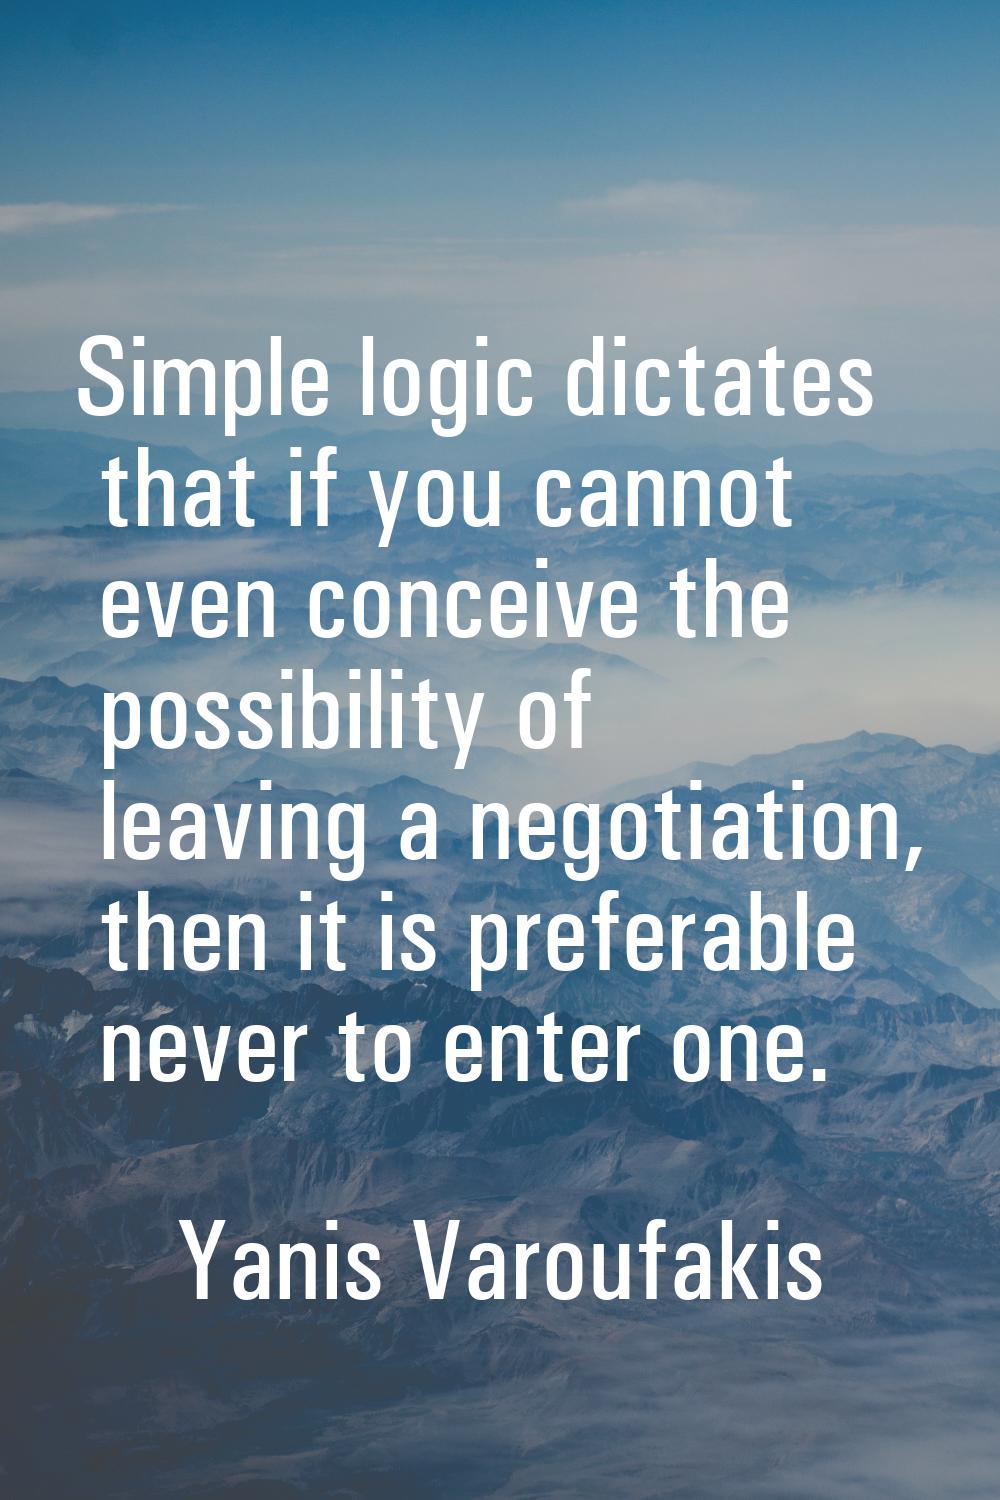 Simple logic dictates that if you cannot even conceive the possibility of leaving a negotiation, th